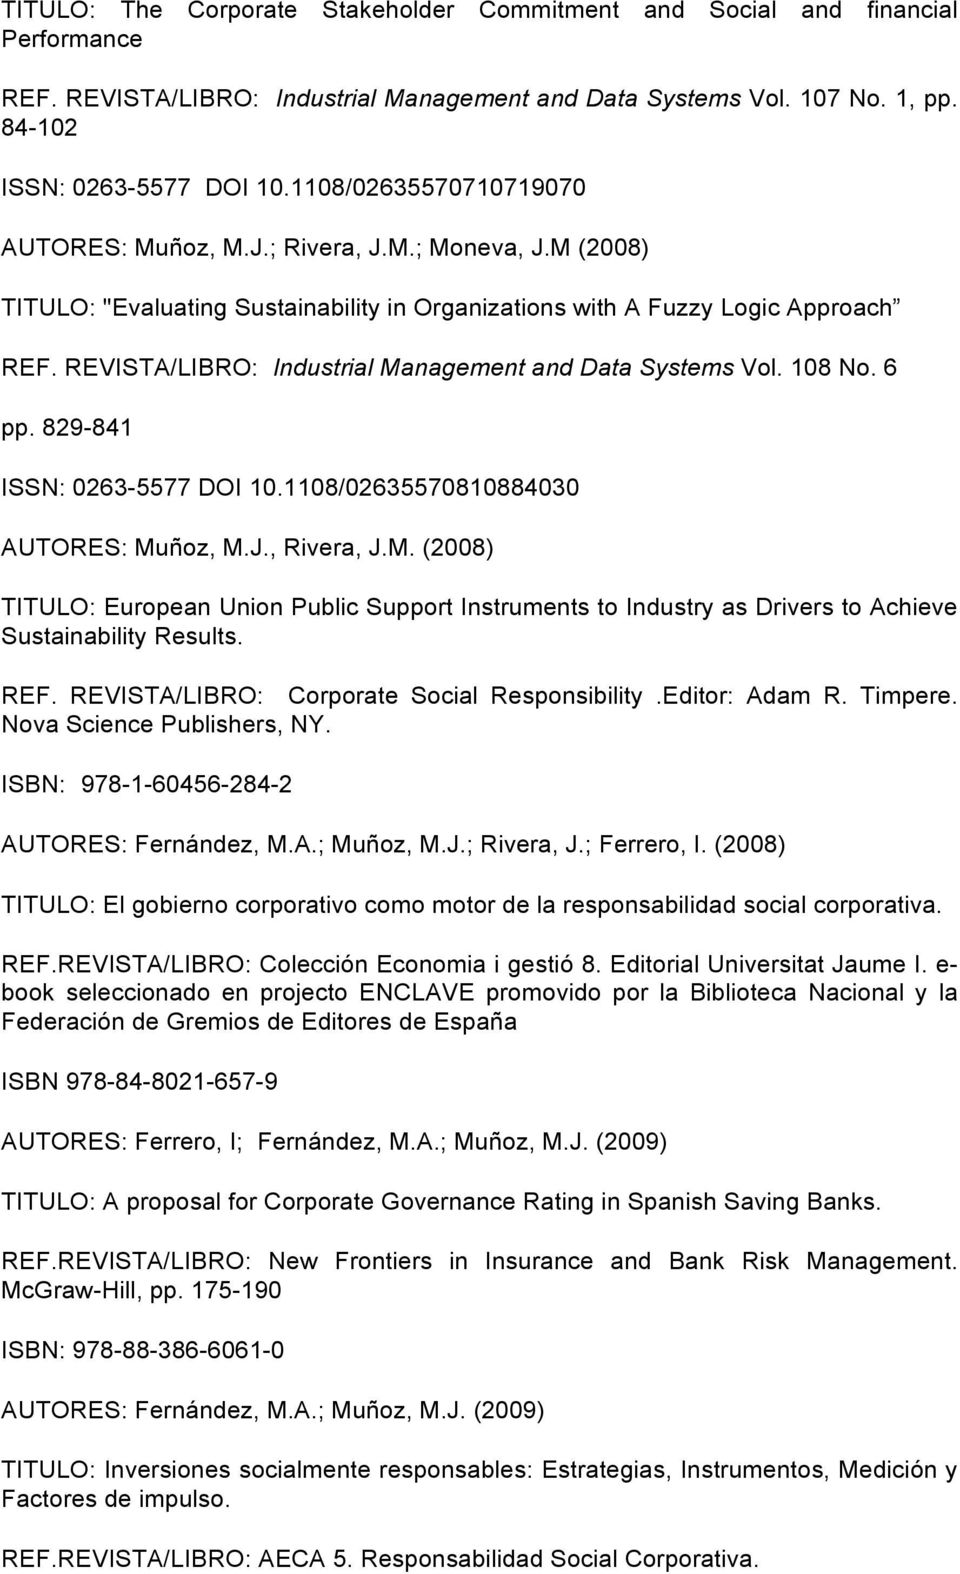 REVISTA/LIBRO: Industrial Management and Data Systems Vol. 108 No. 6 pp. 829-841 ISSN: 0263-5577 DOI 10.1108/02635570810884030 AUTORES: Muñoz, M.J., Rivera, J.M. (2008) TITULO: European Union Public Support Instruments to Industry as Drivers to Achieve Sustainability Results.